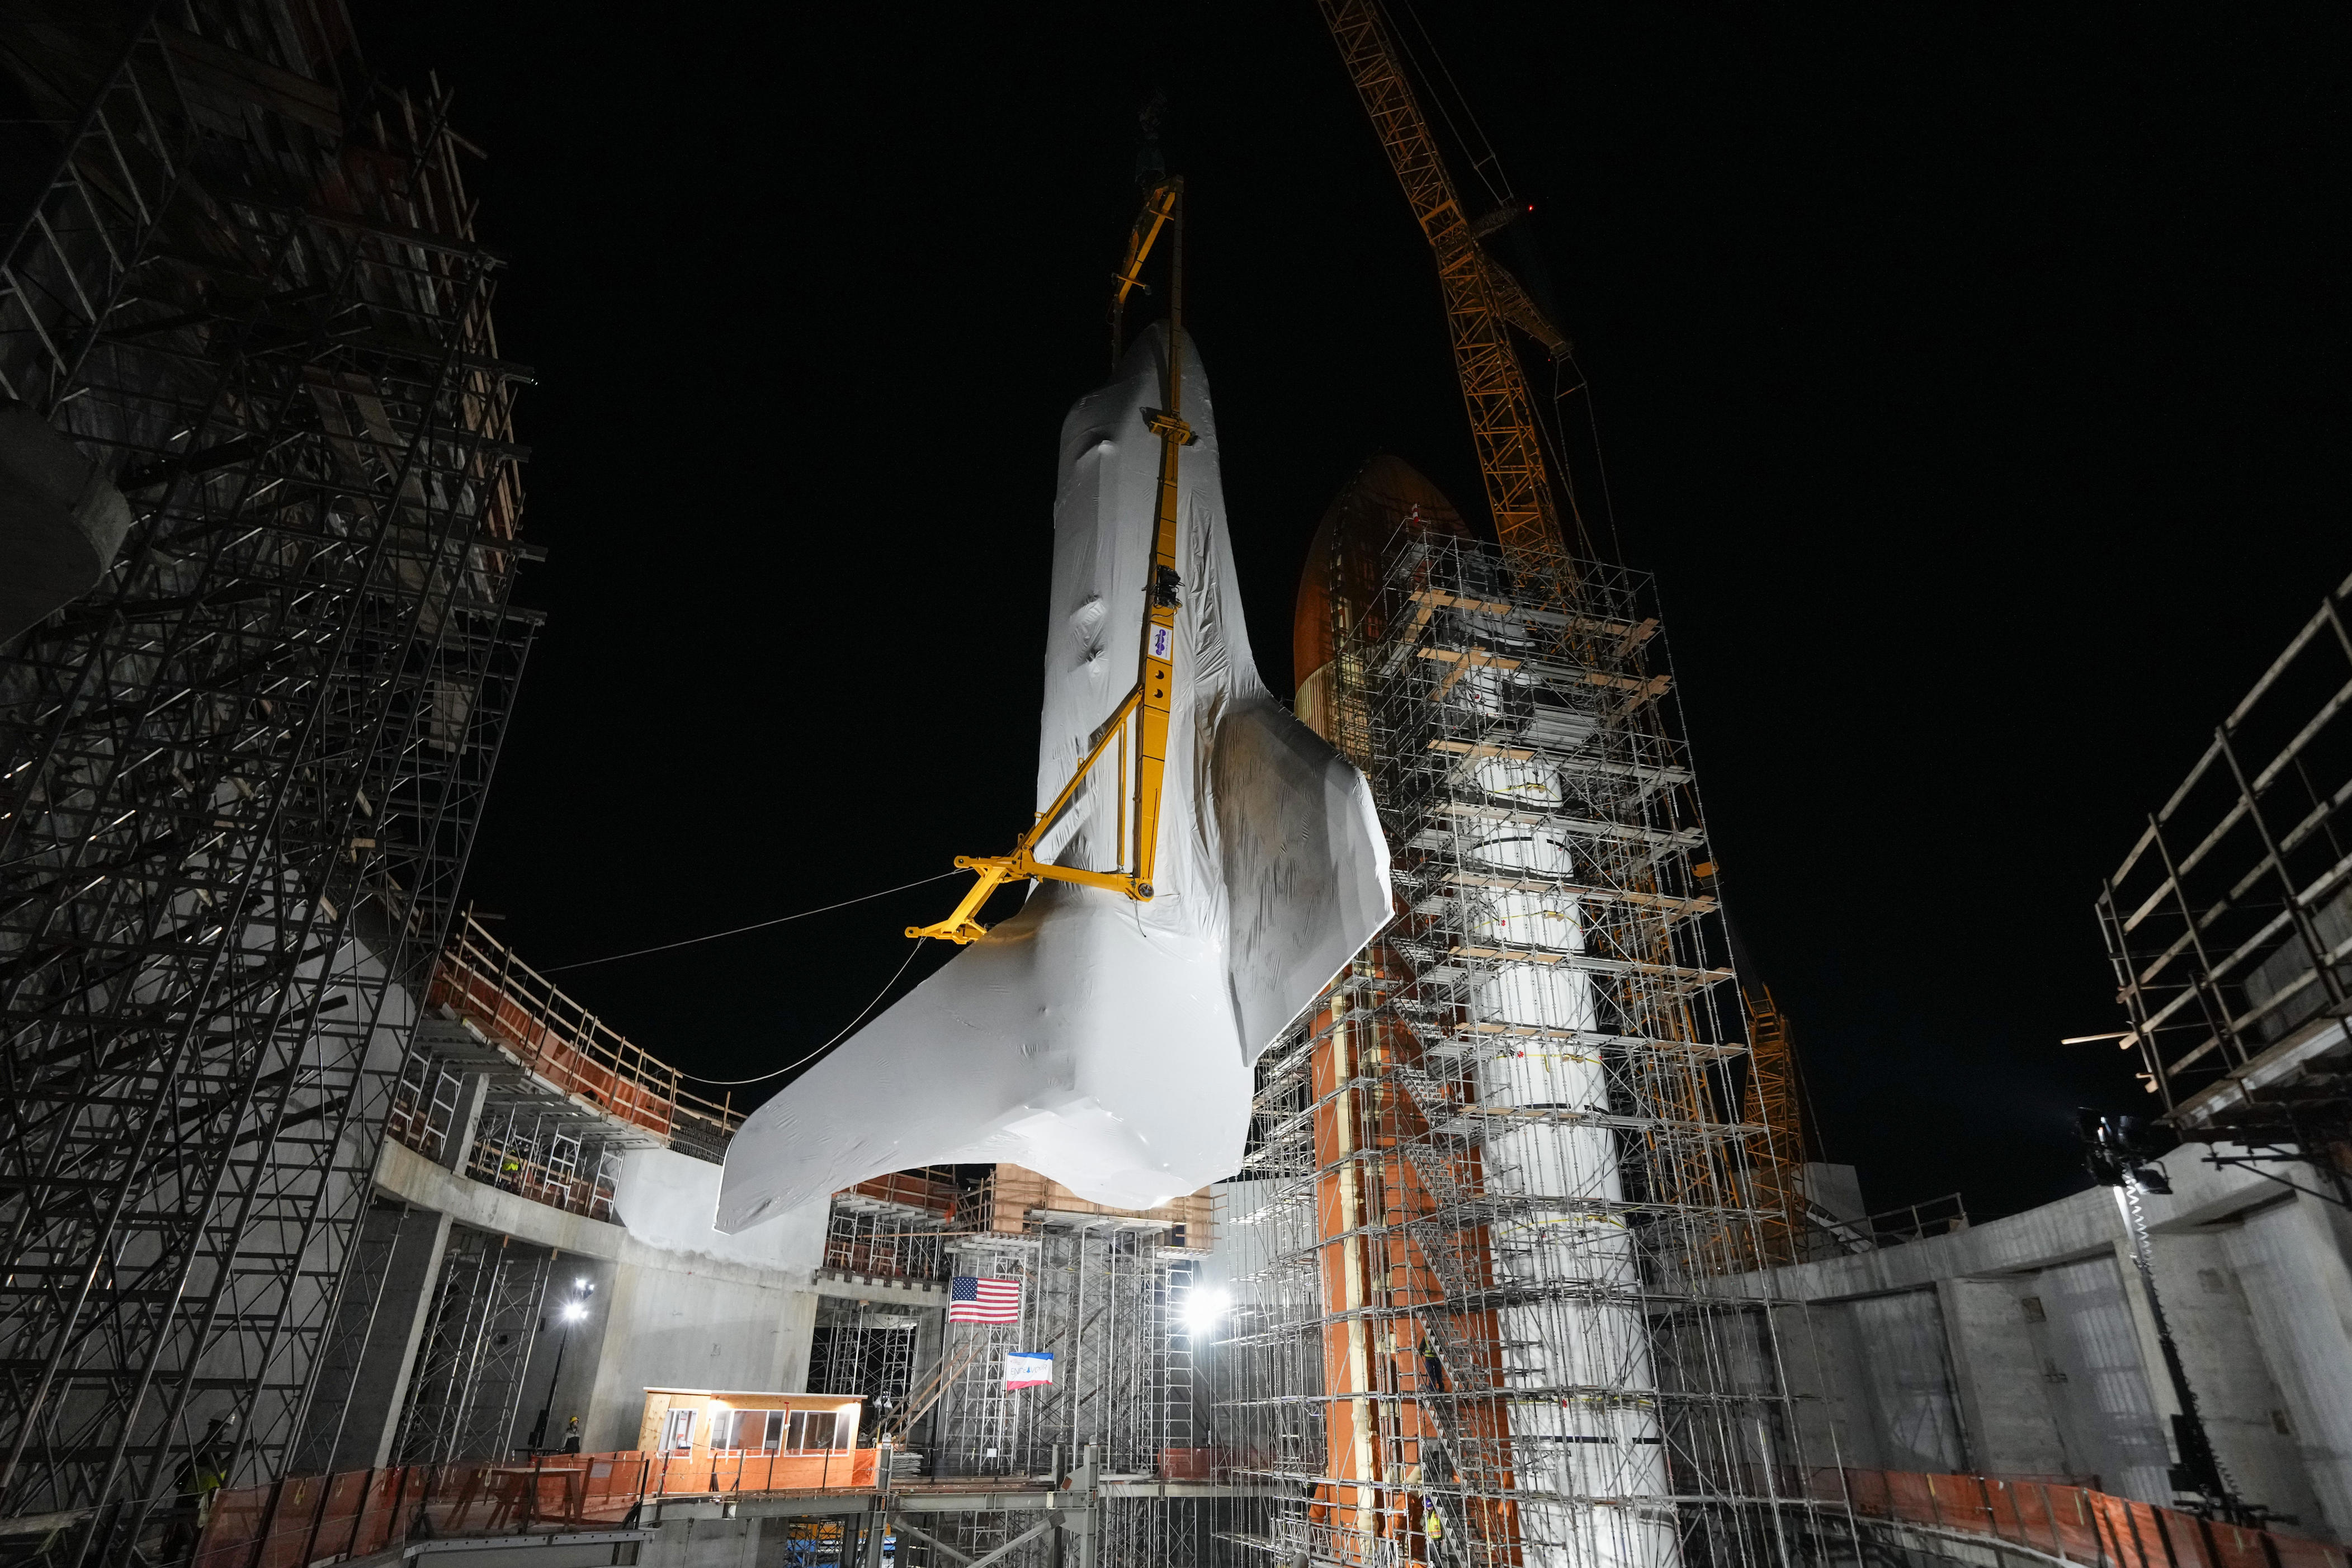 endeavour space shuttle lifted into final 'liftoff' display position